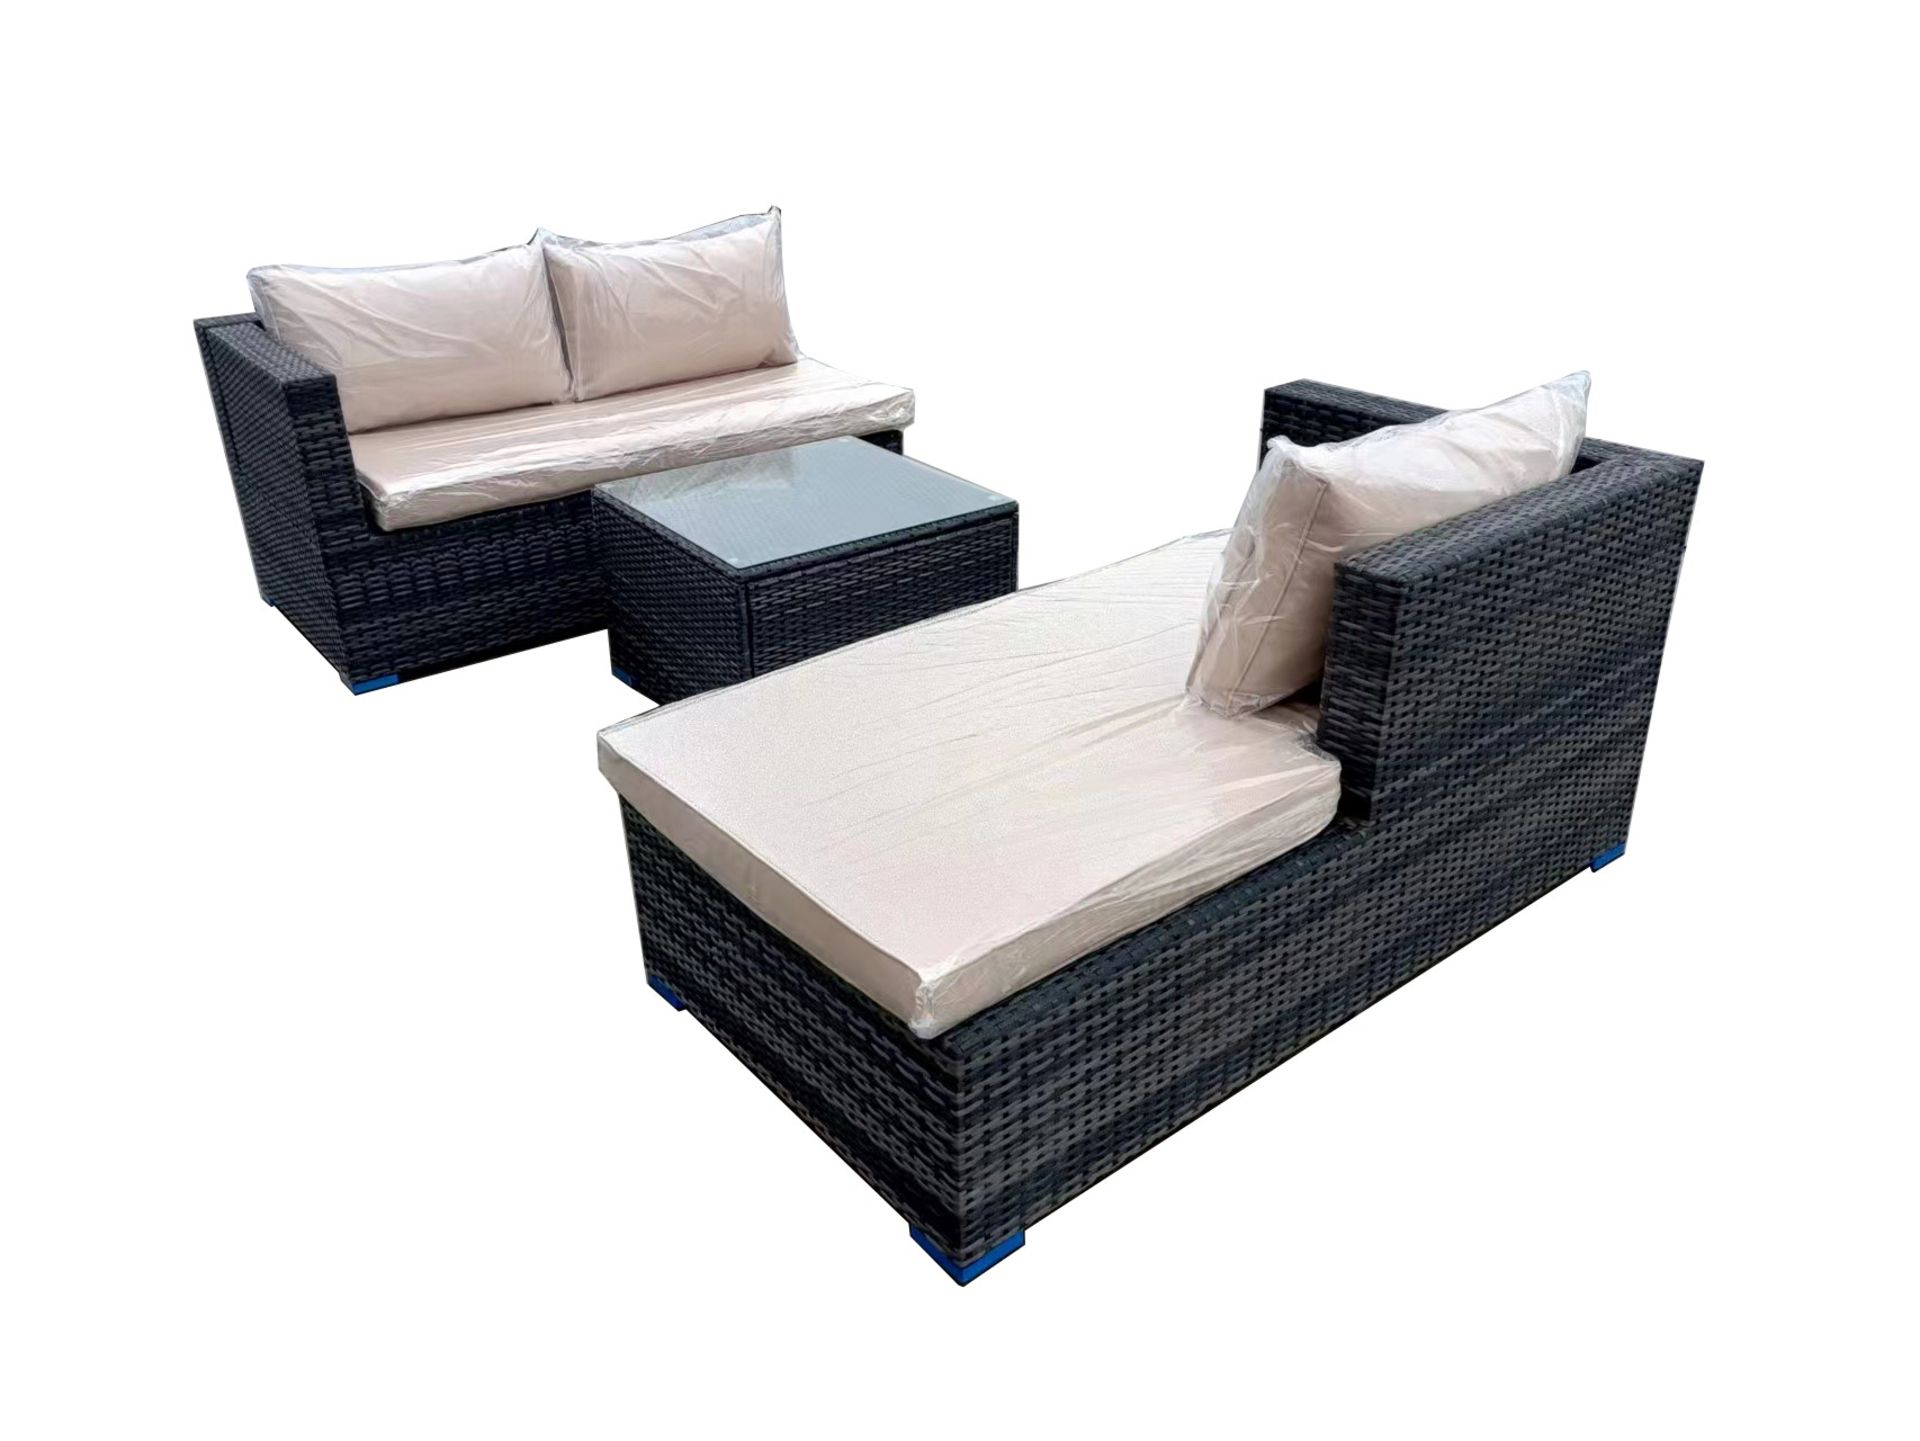 BOX NEW RATTAN BROWN/IVORY CUSHION 3P/C OPTIONAL CORNER SUITE, C/W SOFA, LOUNGER, COFFEE TABLE, - Image 2 of 2